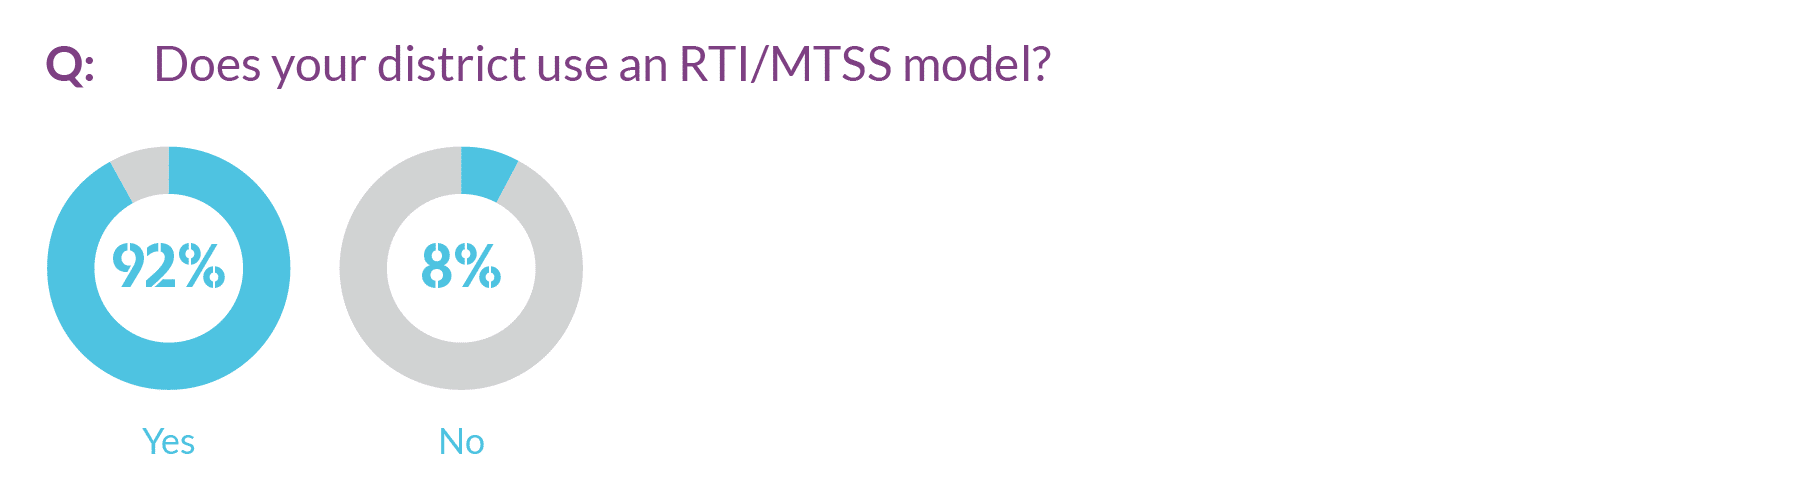 Graph showing breakdown of districts that use an RTI/MTSS model